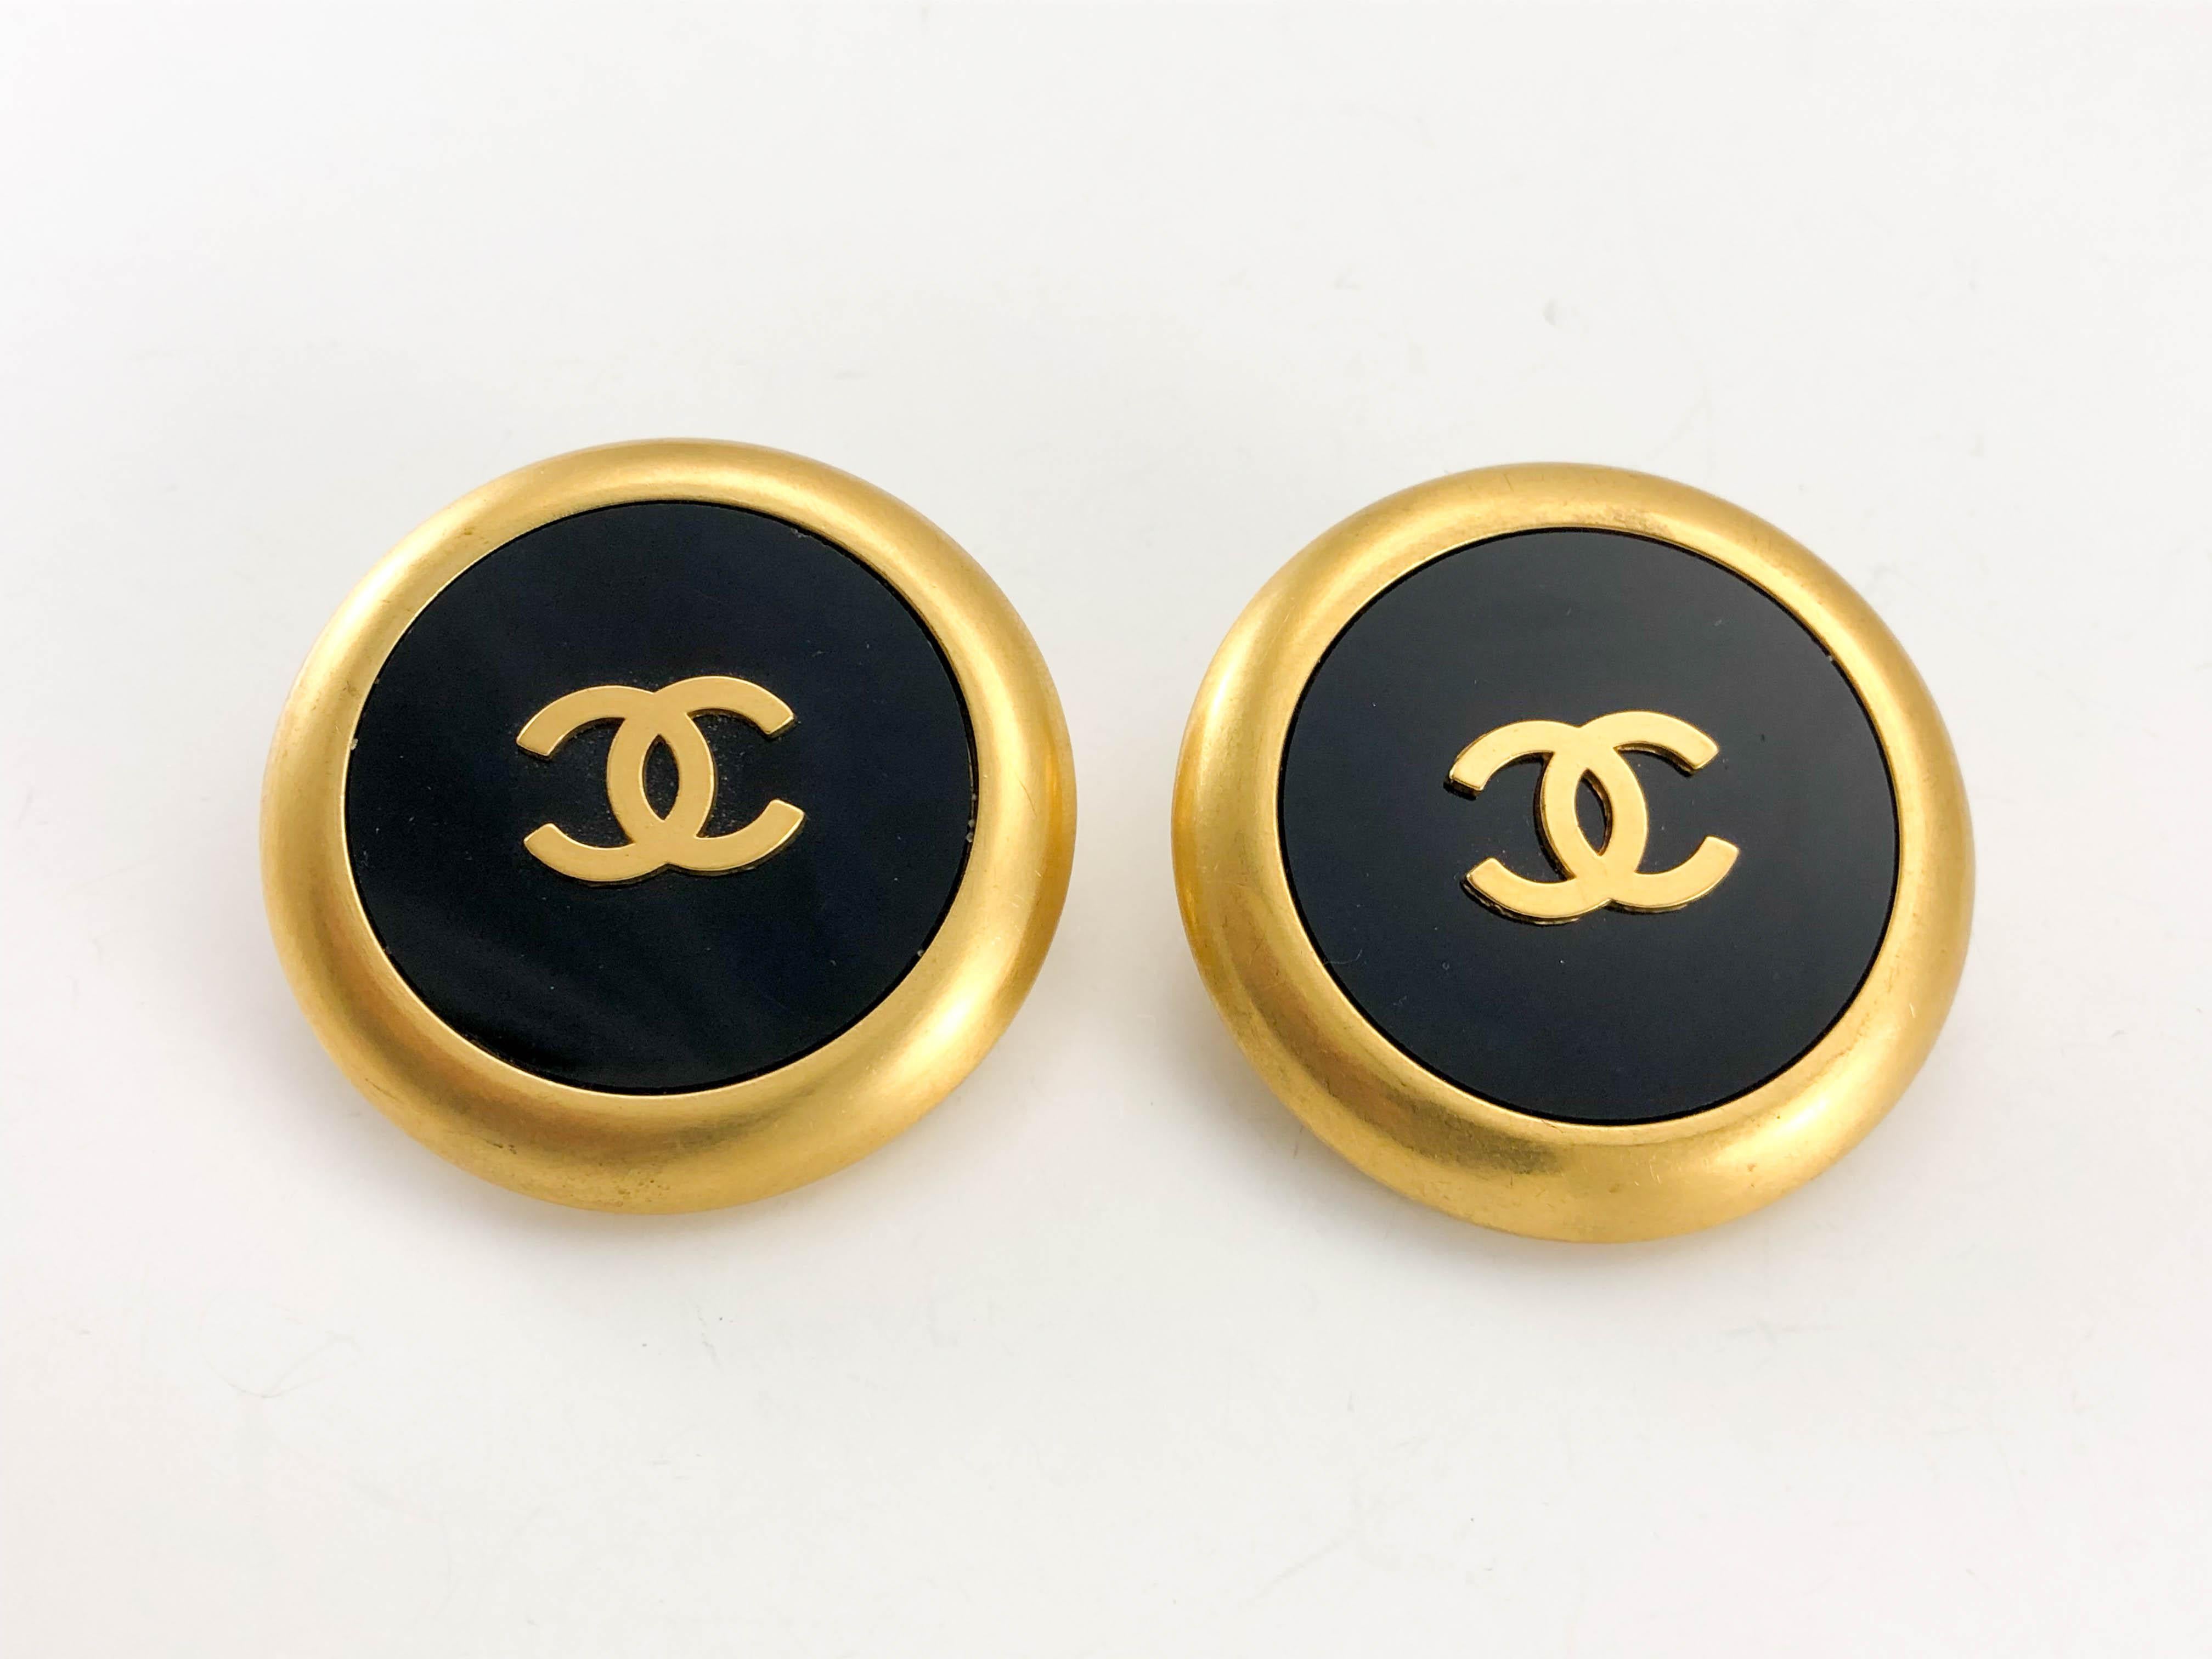 1992 Chanel Large Black And Golden Round Logo Earrings In Excellent Condition For Sale In London, Chelsea